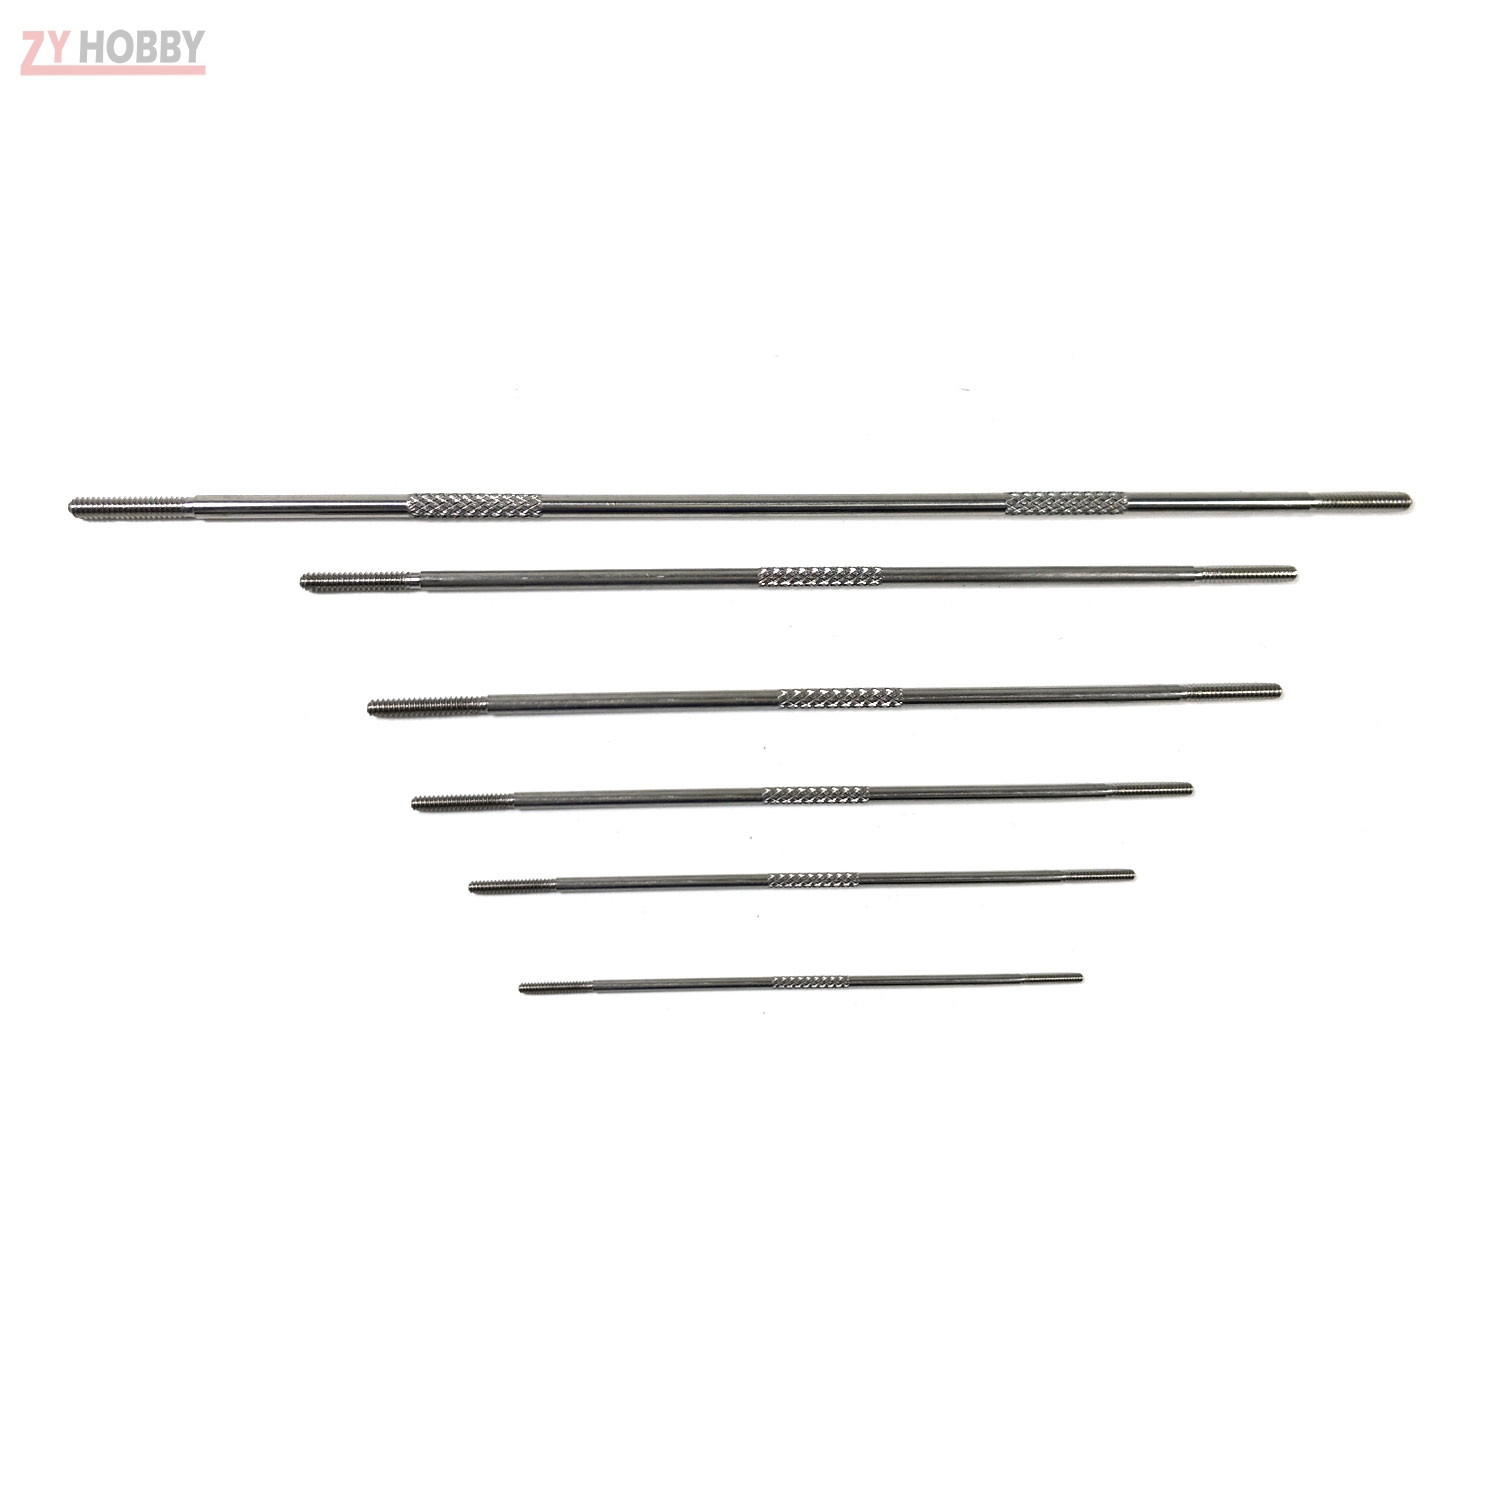 5pcs M2 x 150 mm Metal Push-pull Rods For RC Airplane Stable Connection Rod 